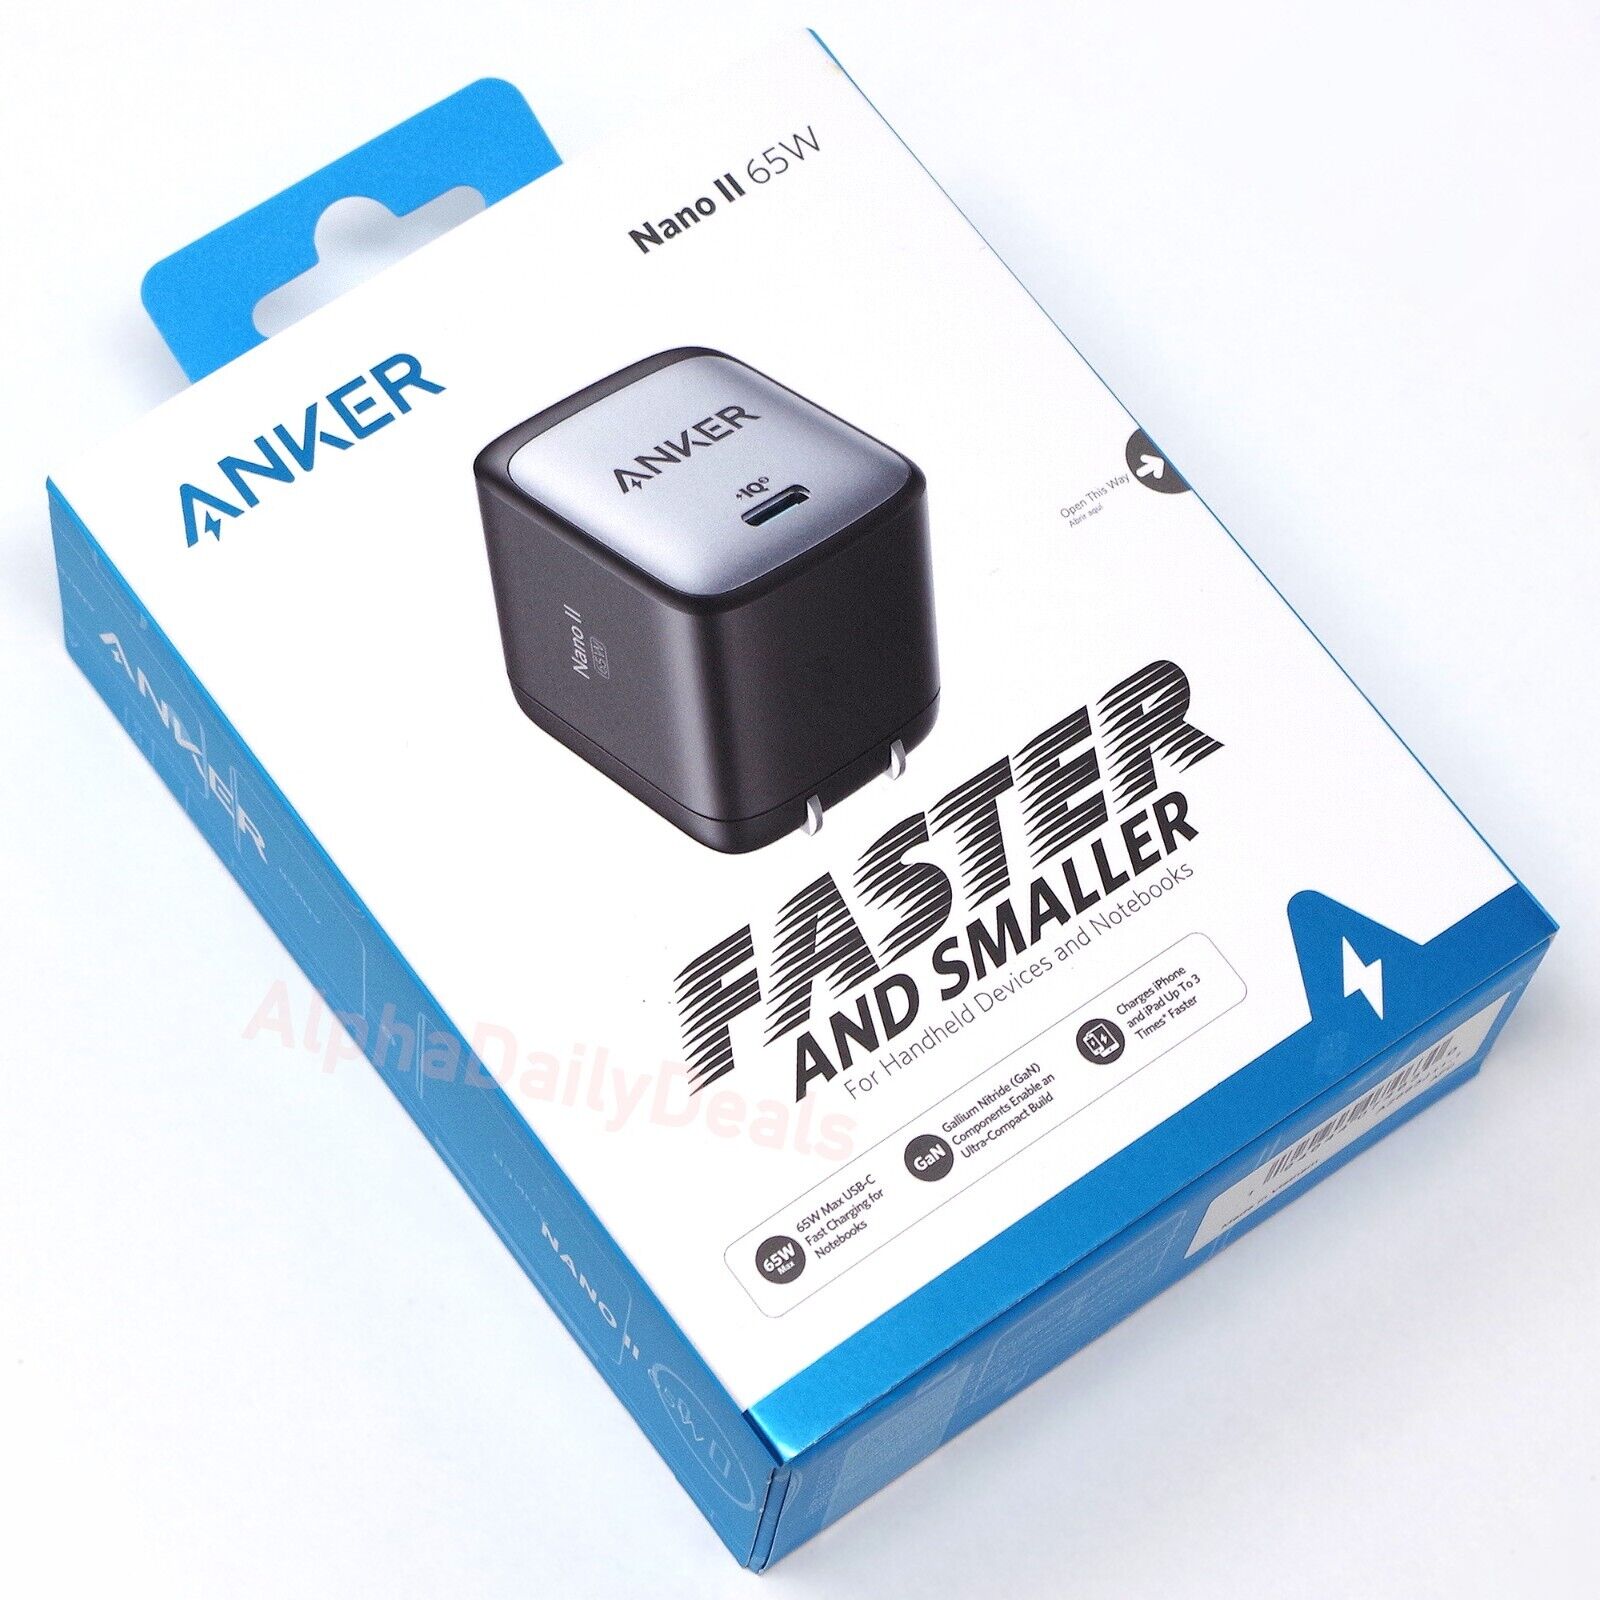 NEW Anker Nano II 65W USB-C Fast Wall Charger Adapter for Laptop Macbook Pro Air